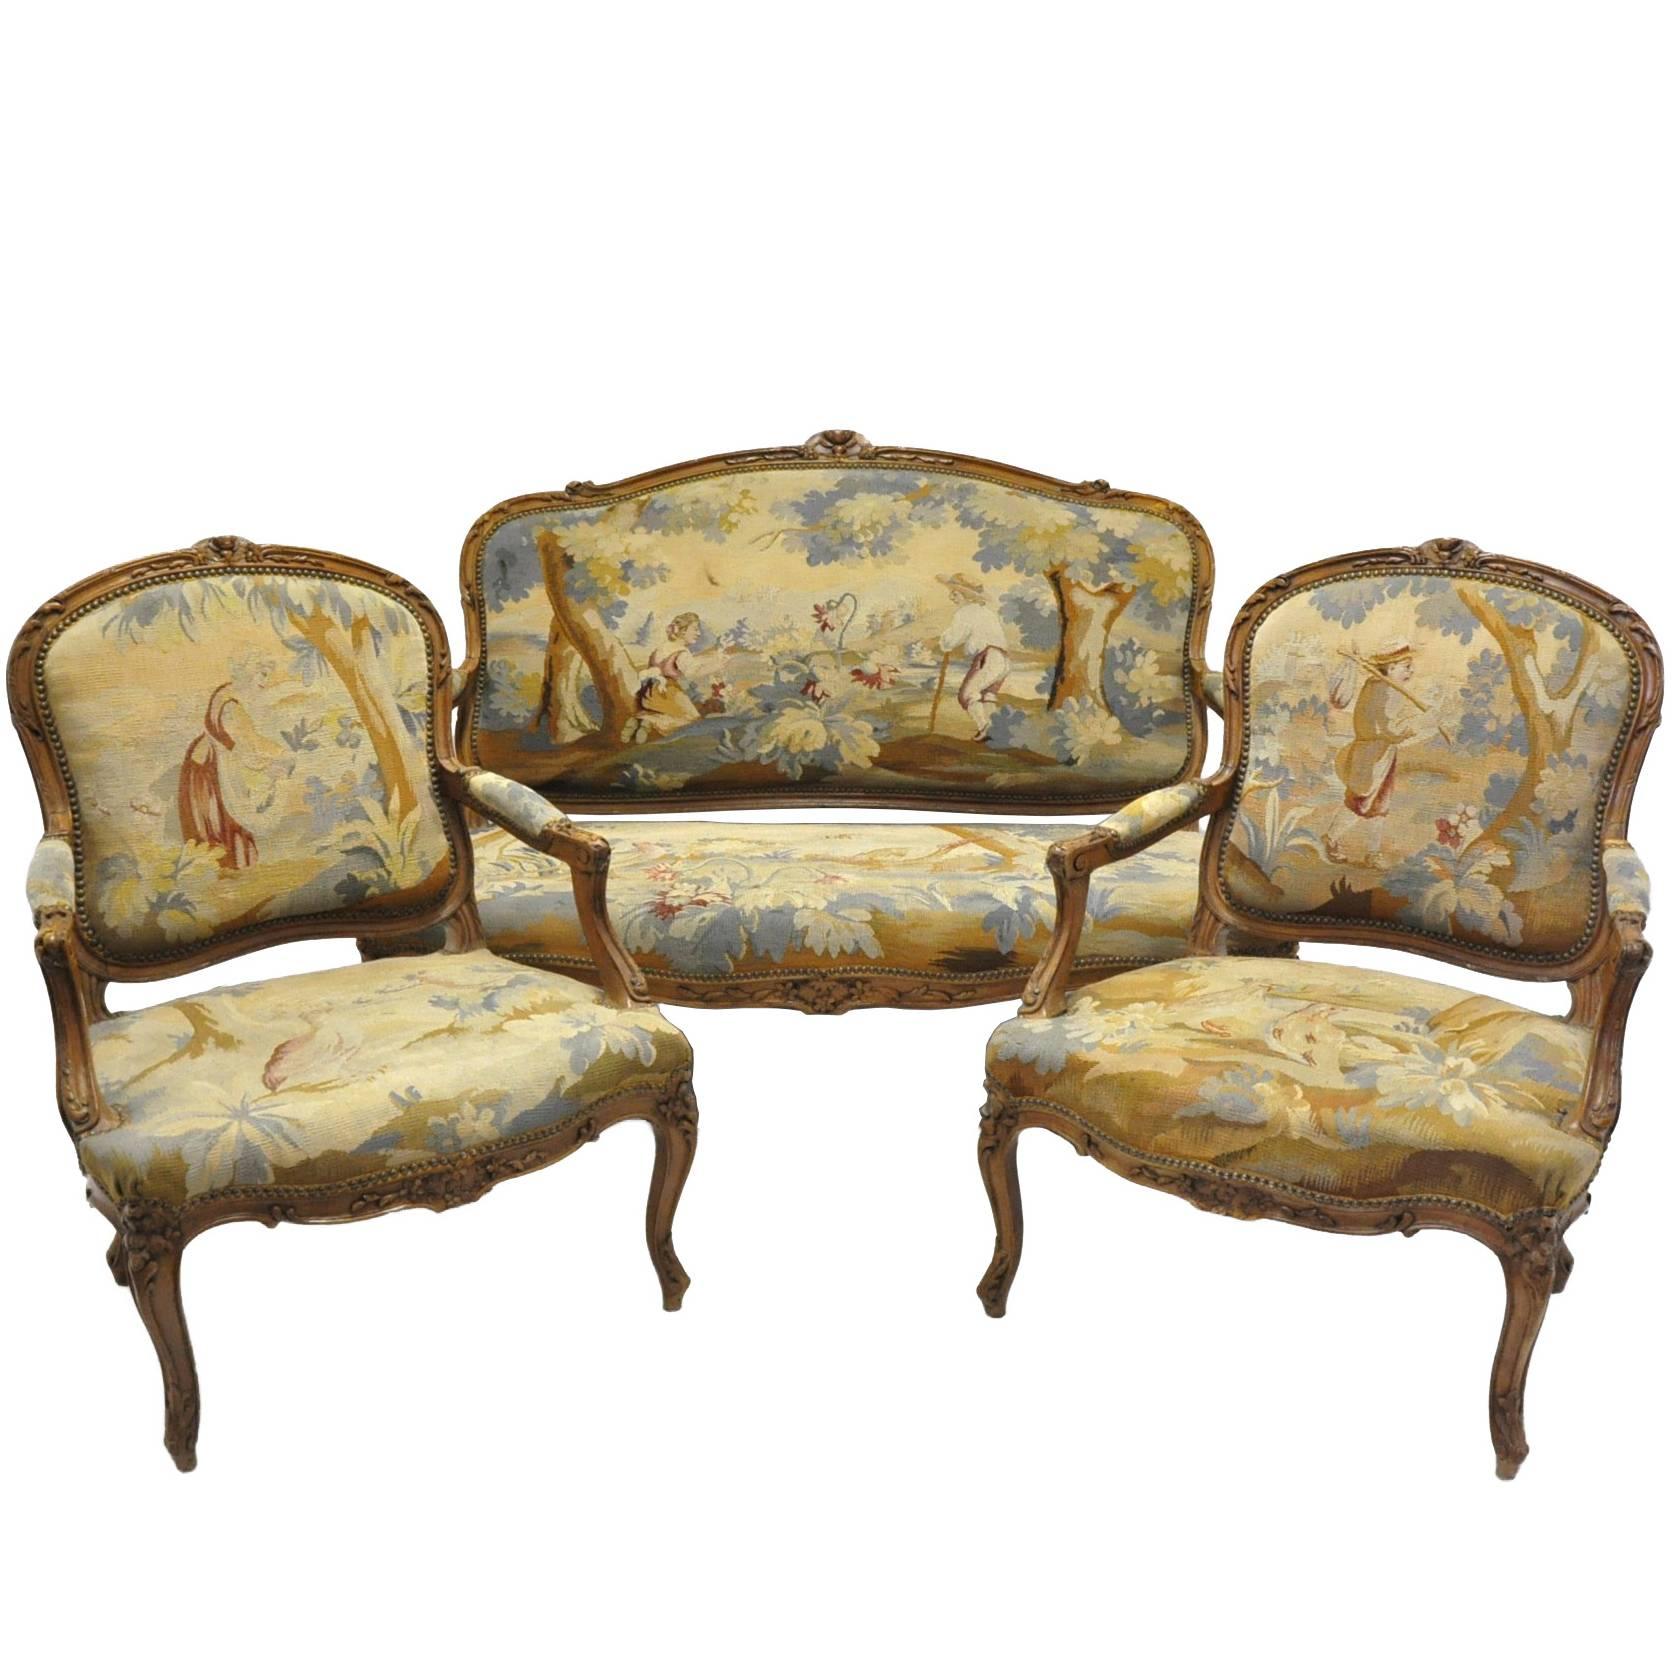 Three-Piece Antique Louis XV Salon Seating Set with Aubusson Tapestry